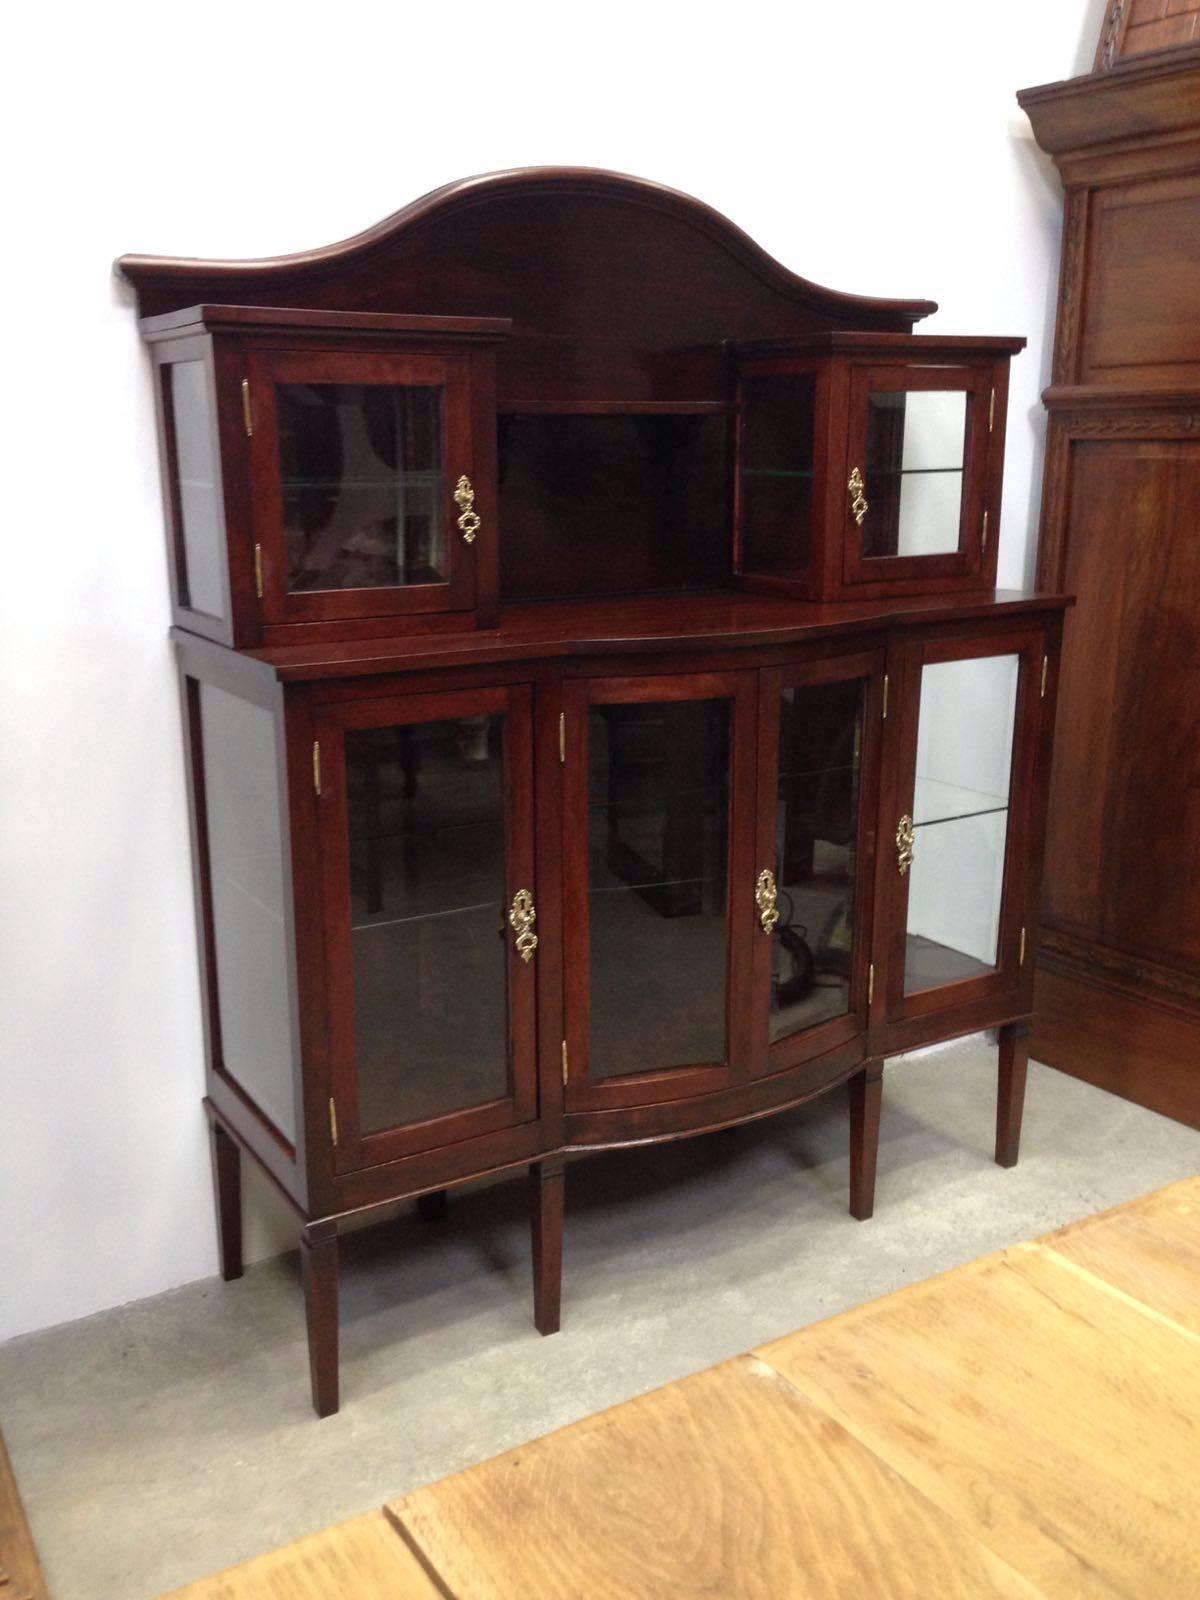 Modernist mahogany buffet with crest.
Grand buffet made of mahogany.
Glass cabinet doors on either side above side cabinets with inside shelves.